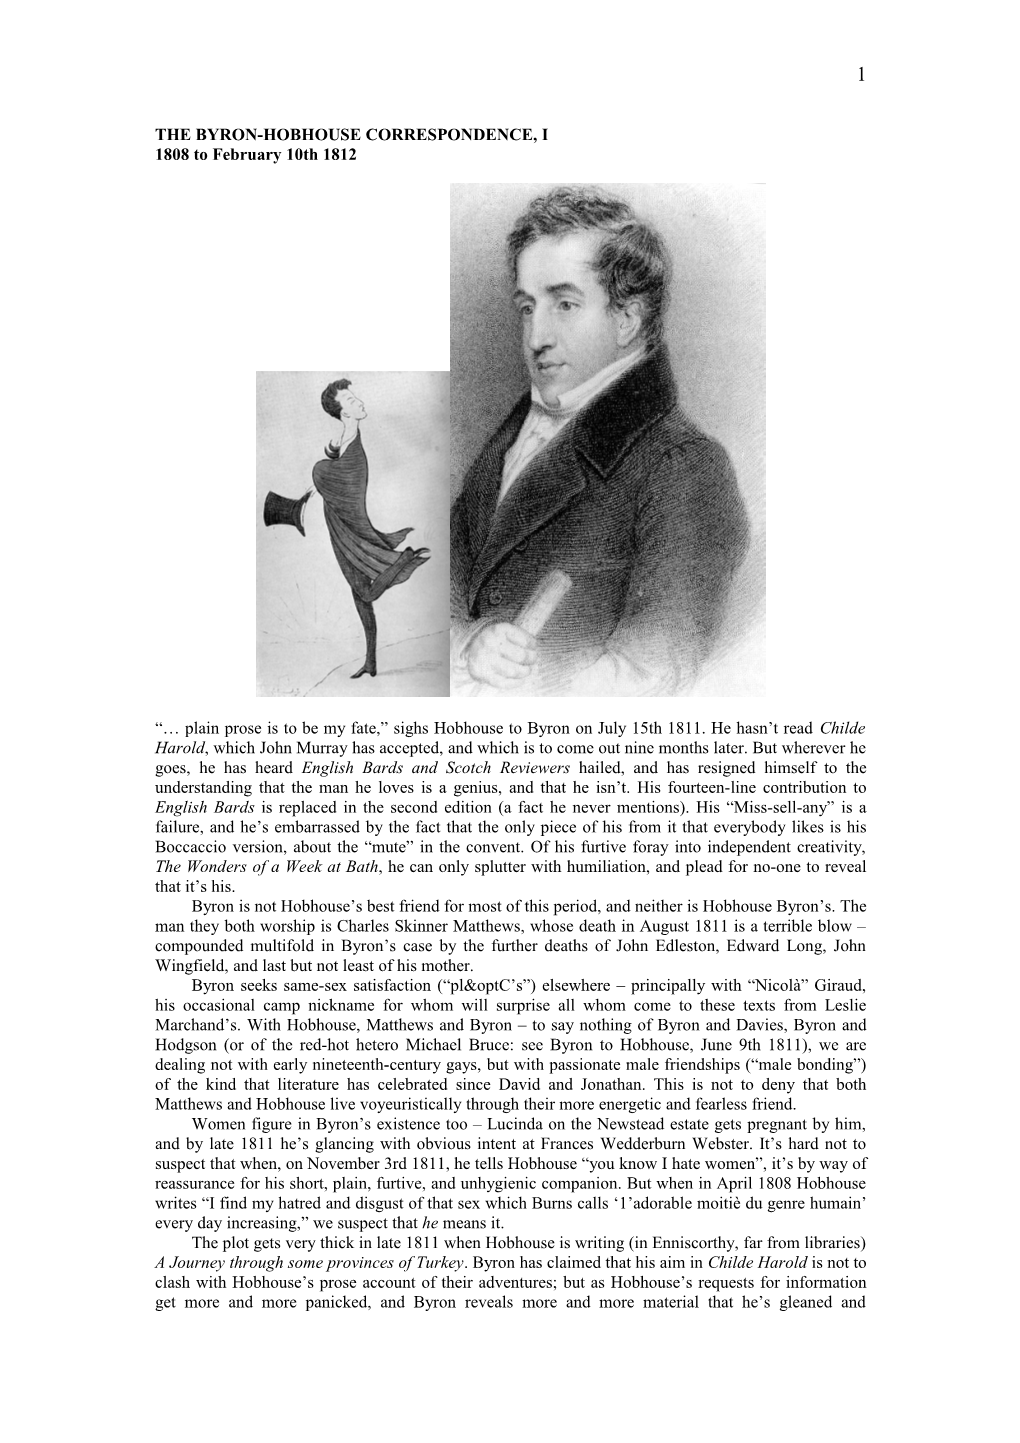 Byron's Letters to Hobhouse